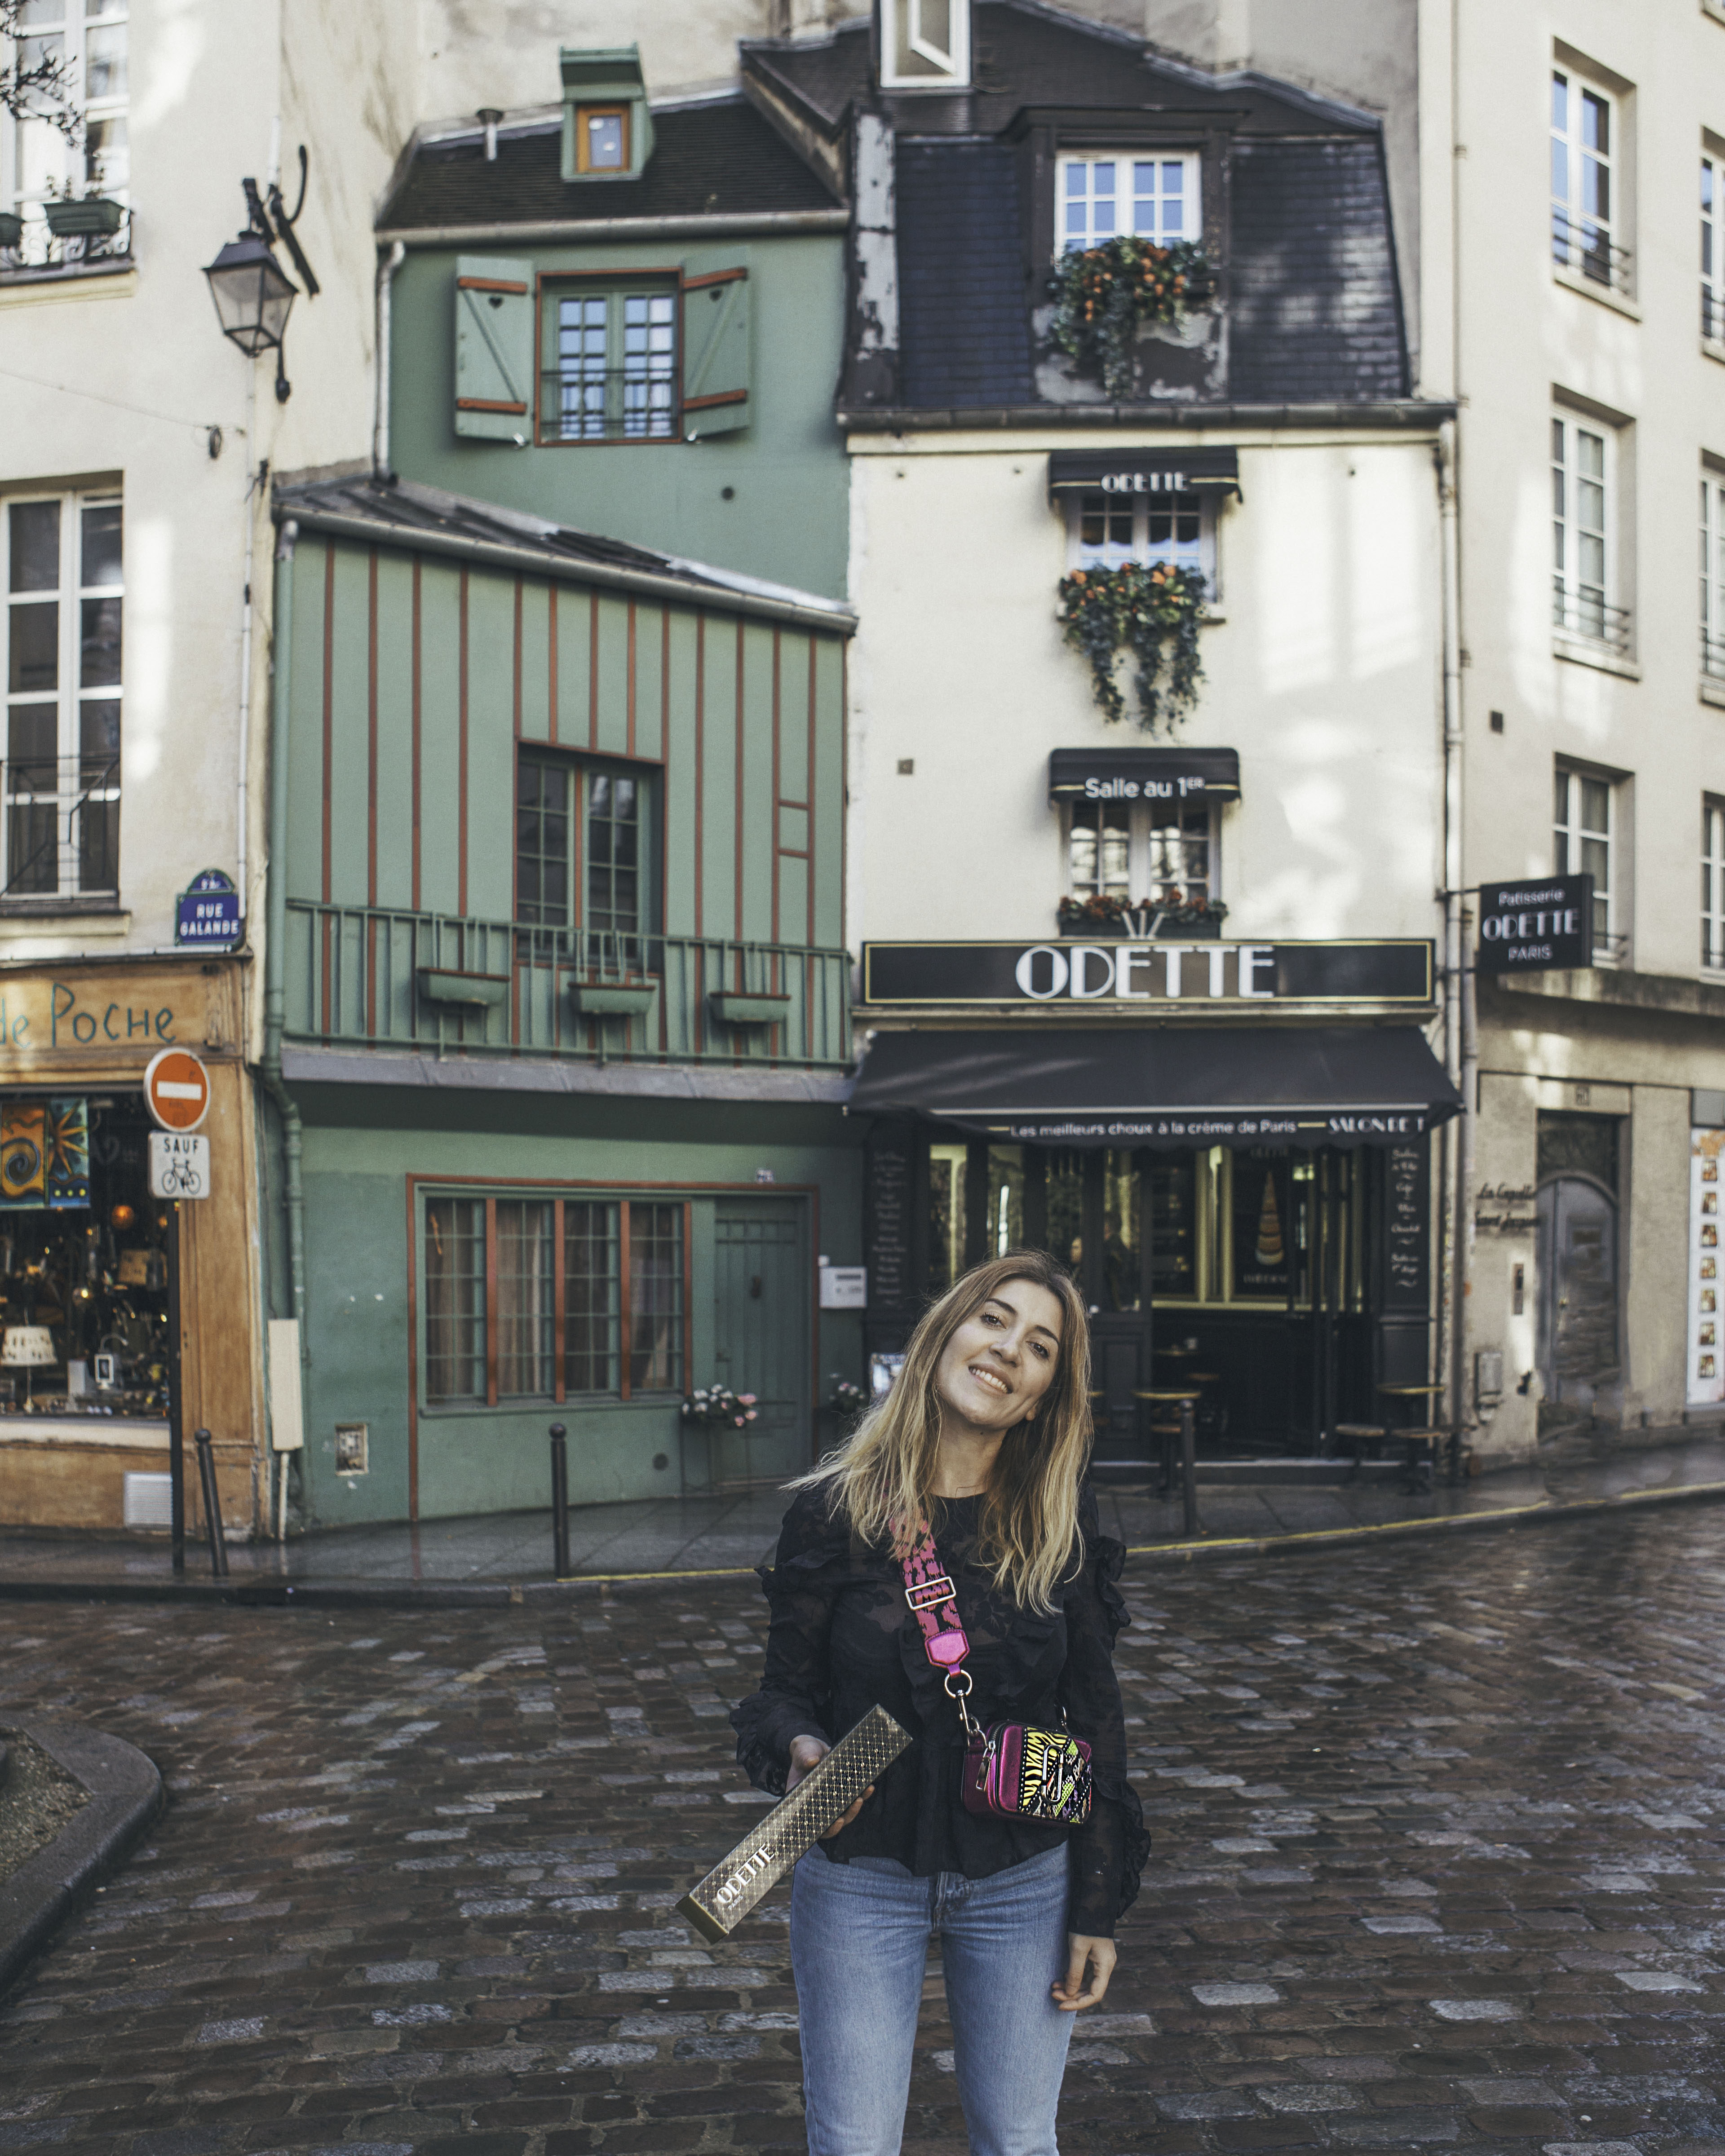 Odette-1 How to spend a day in Paris like a blogger